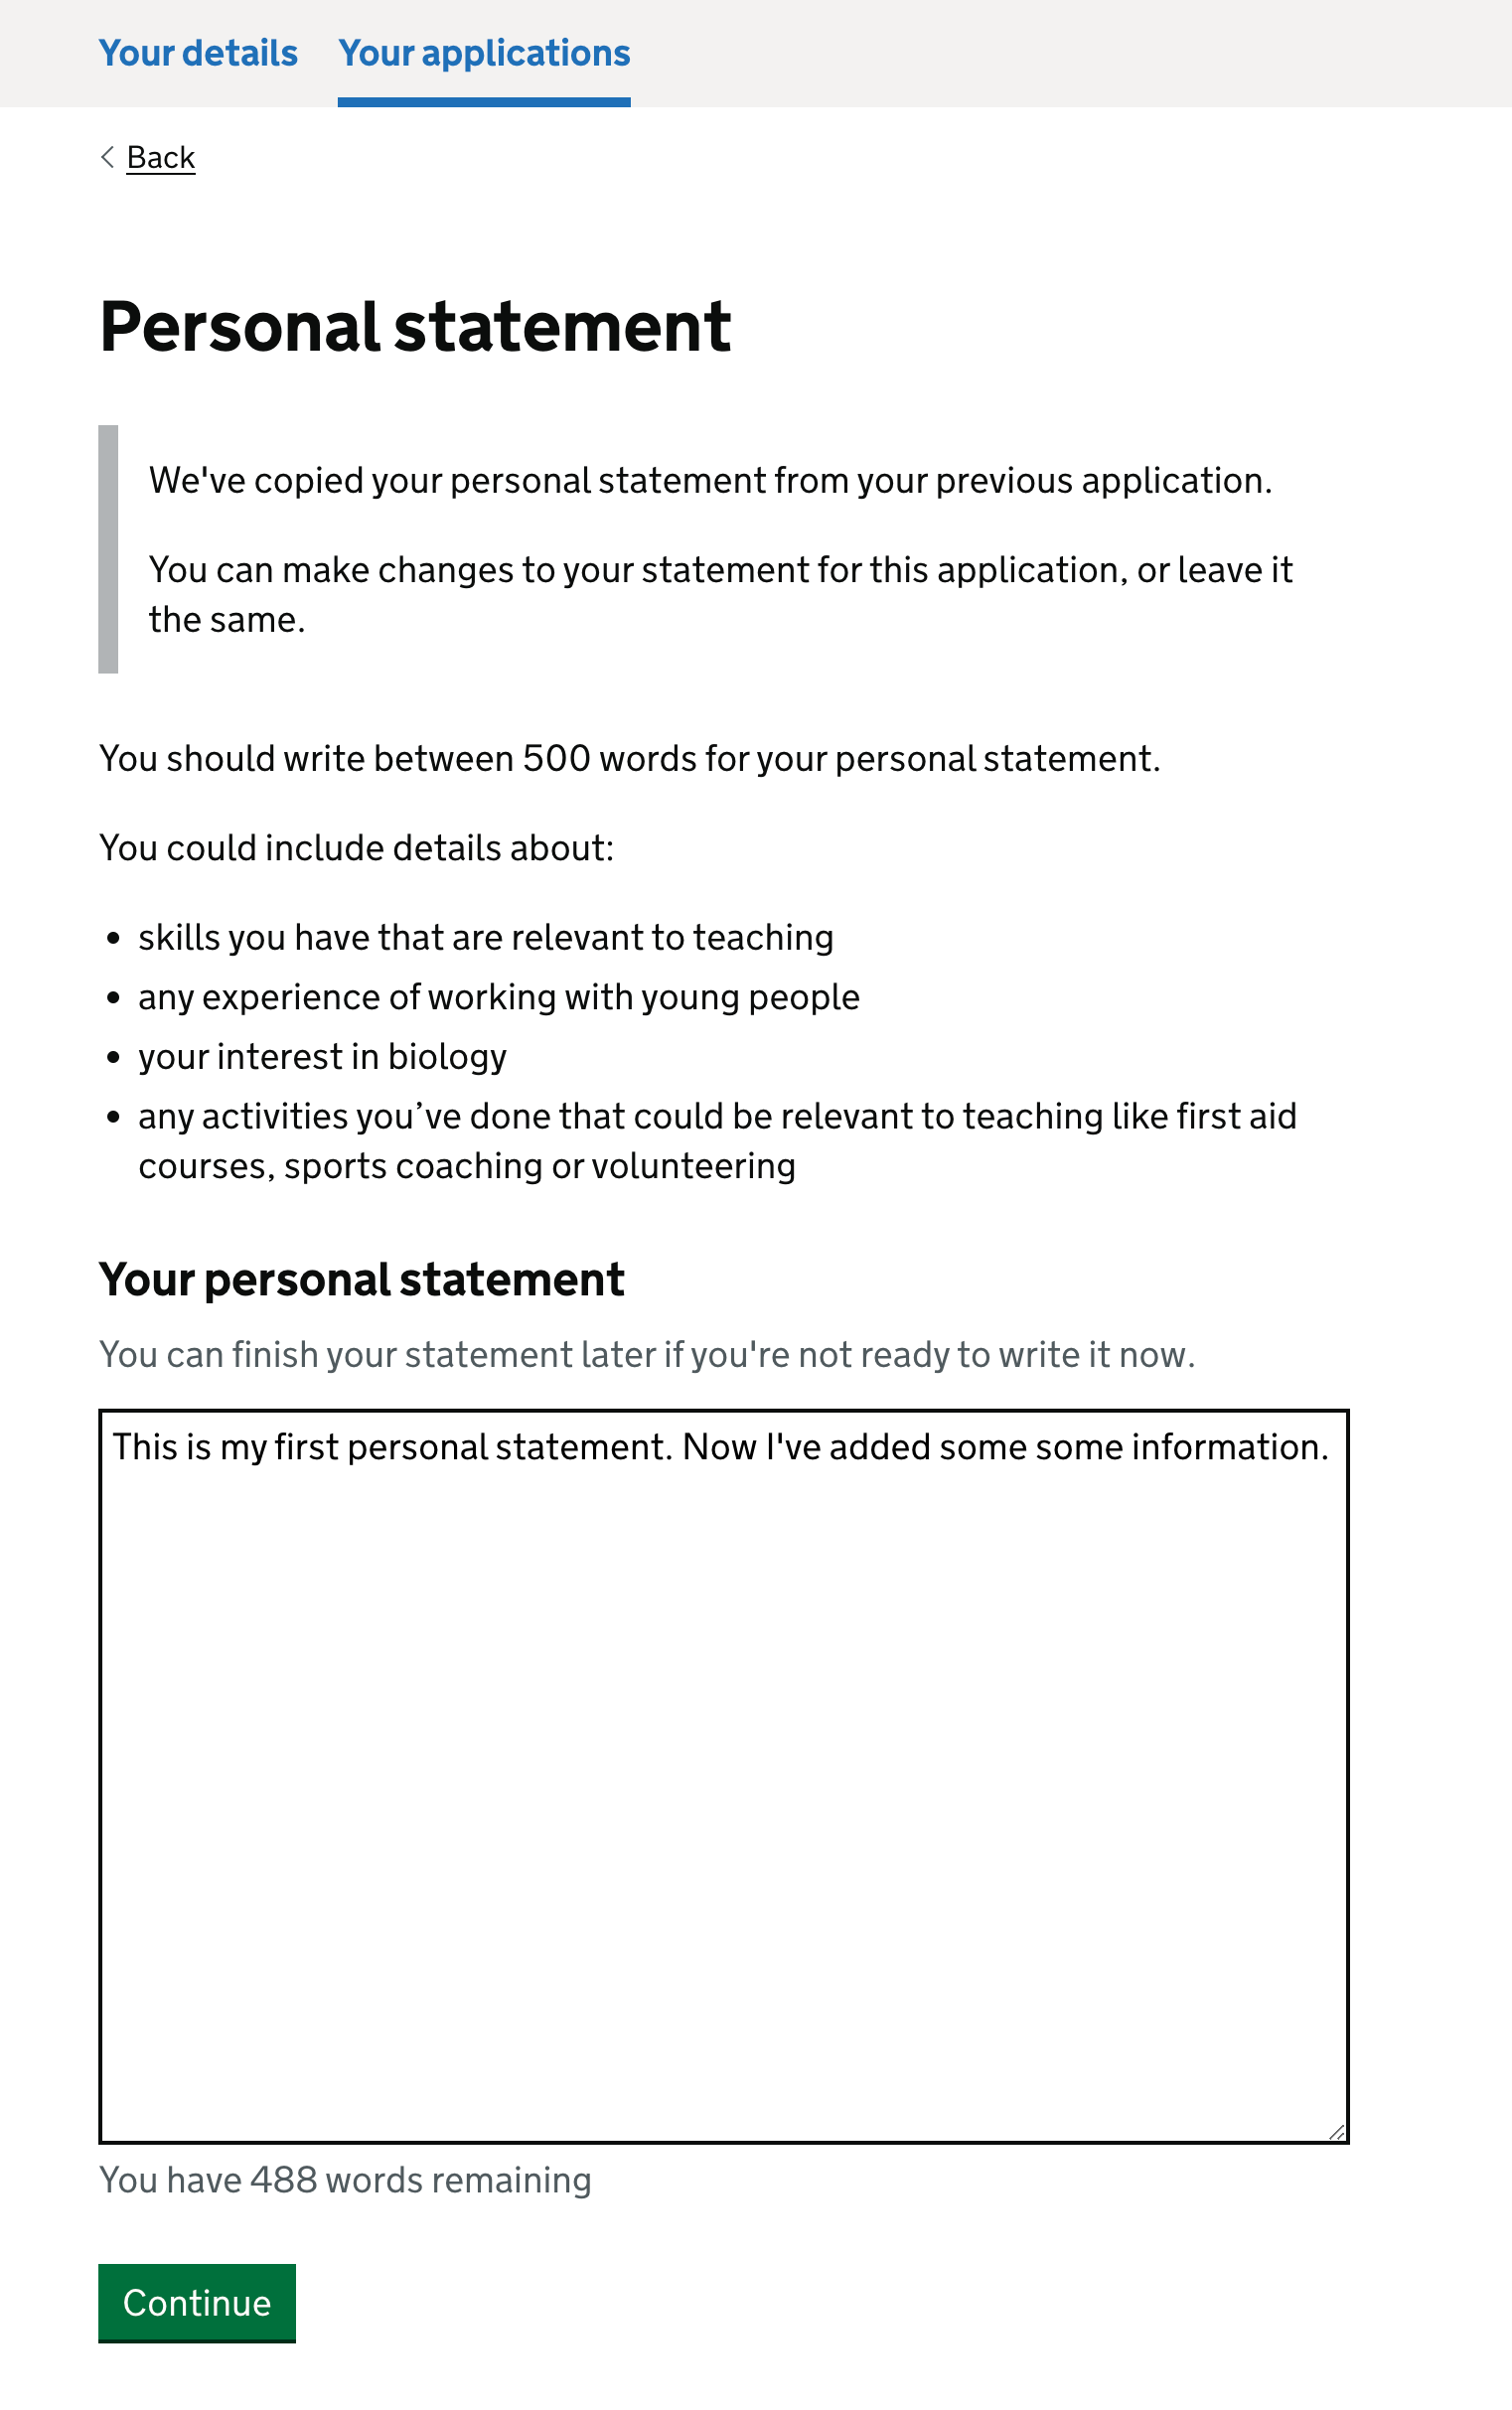 Screenshot showing the personal statement question. There is inset text to tell the candidate that we've copied over their previous personal statement and they can edit it if they want to.